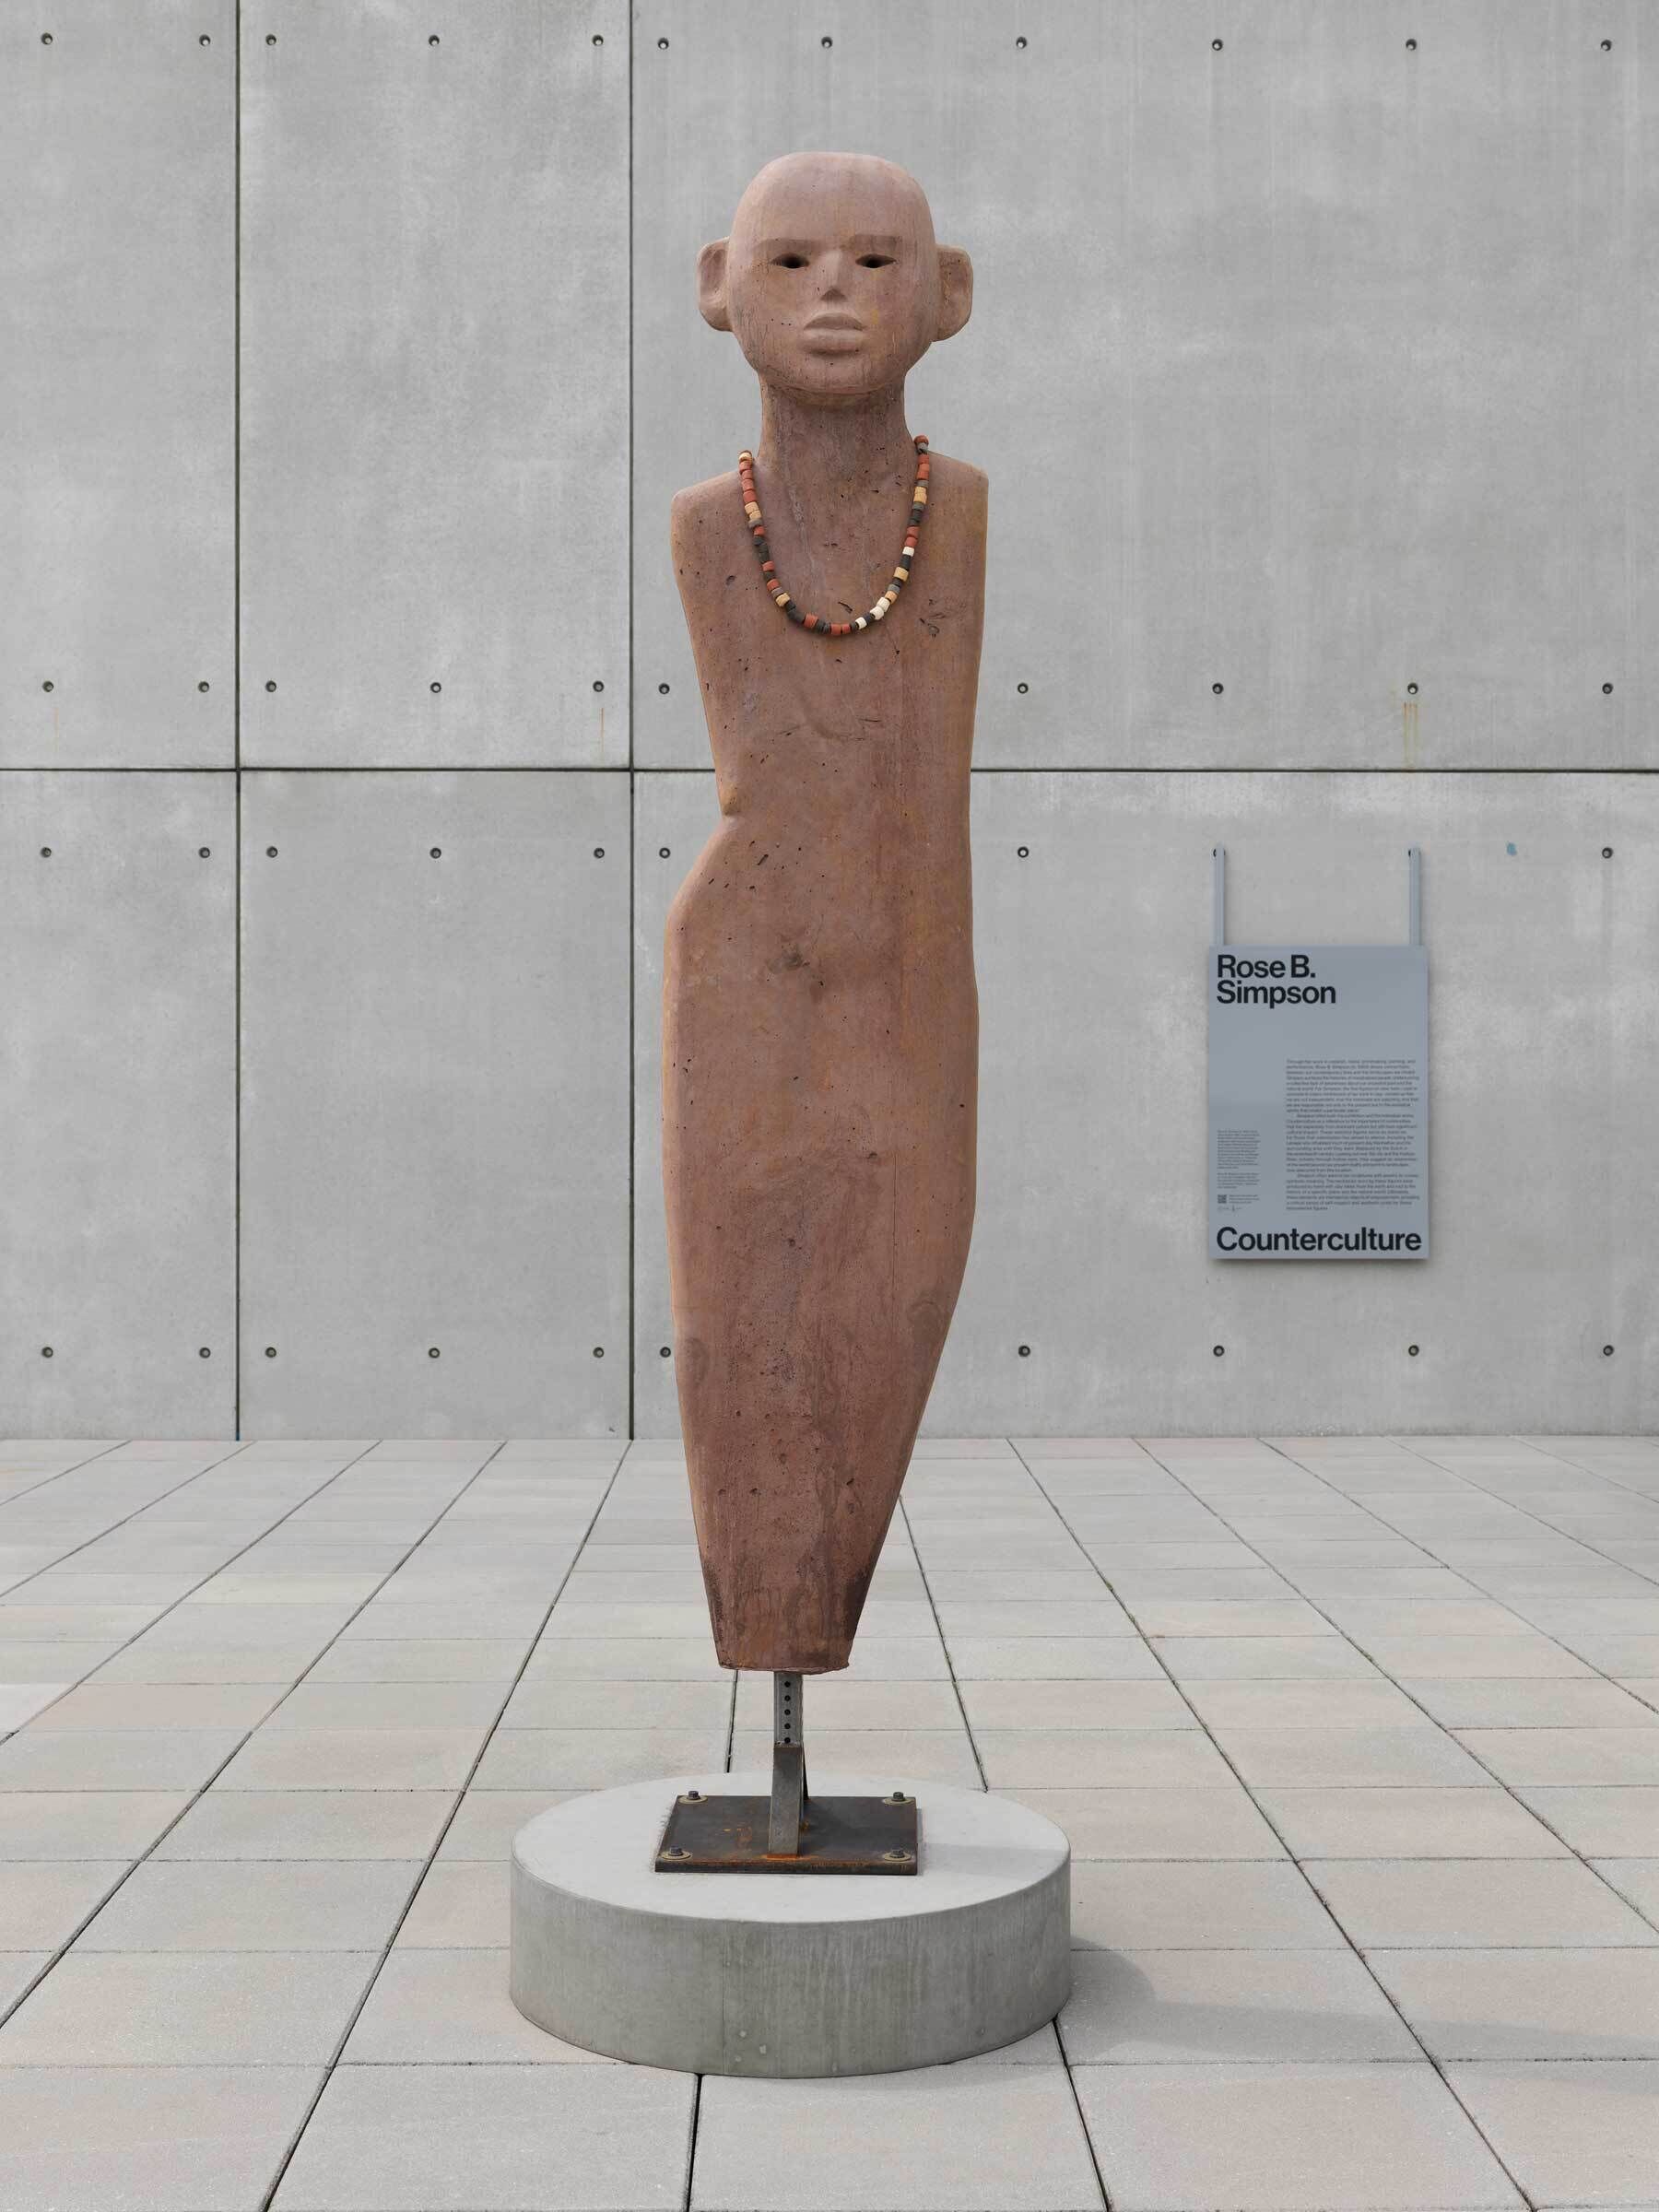 A tall, brown human figure sculpture wearing beaded necklaces with no limbs stand straight on the balcony.